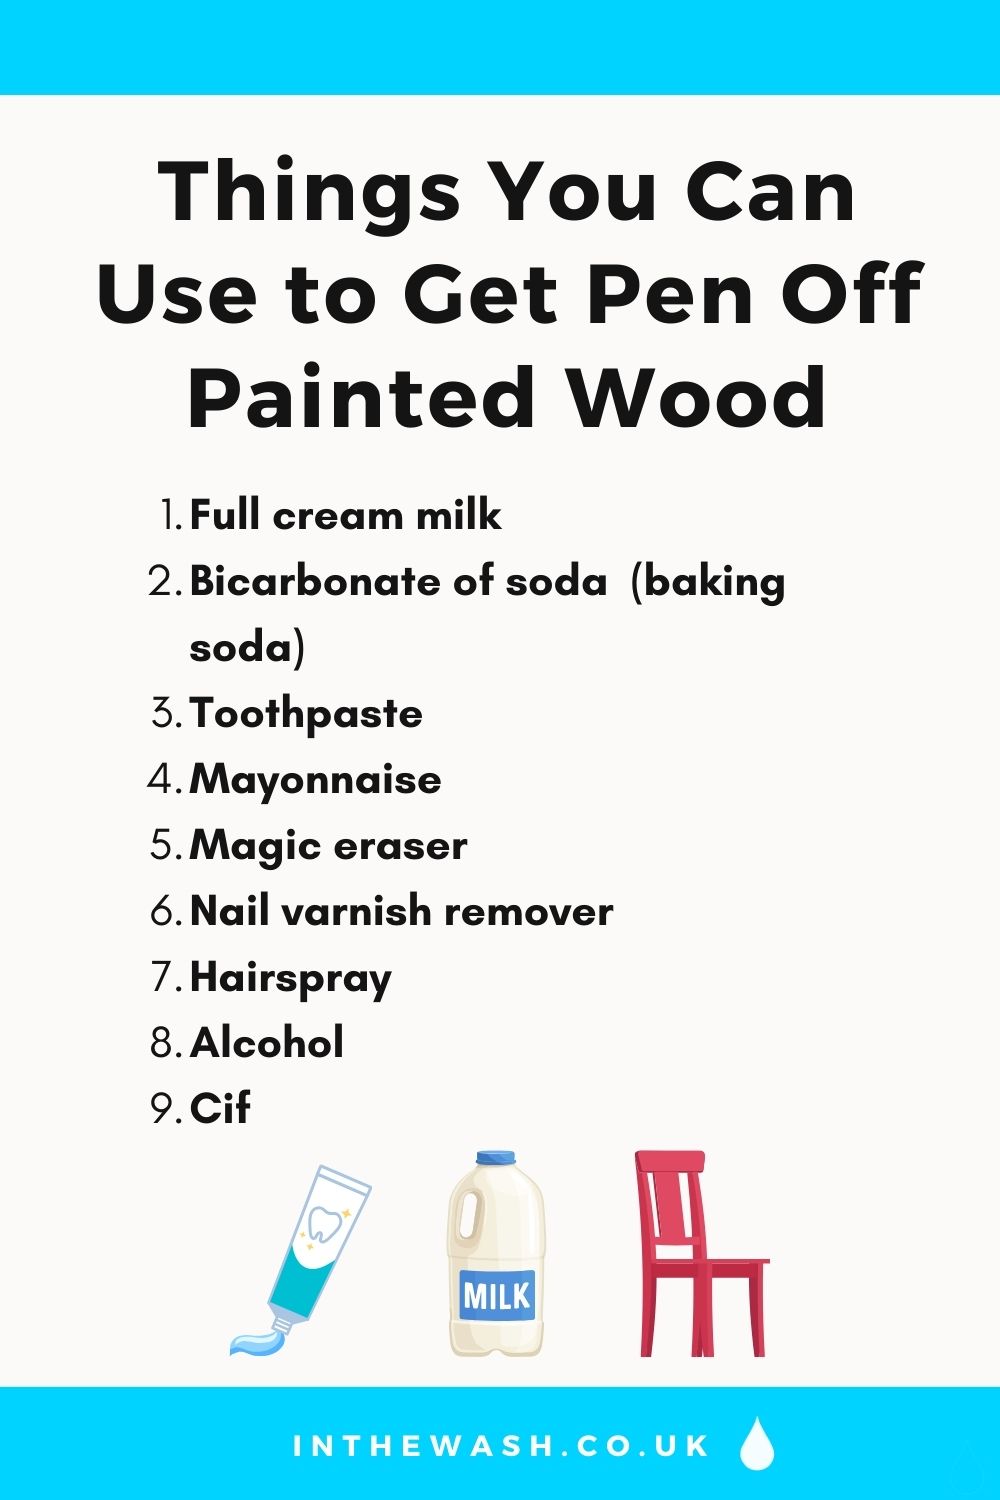 Things you can use to get pen off painted wood